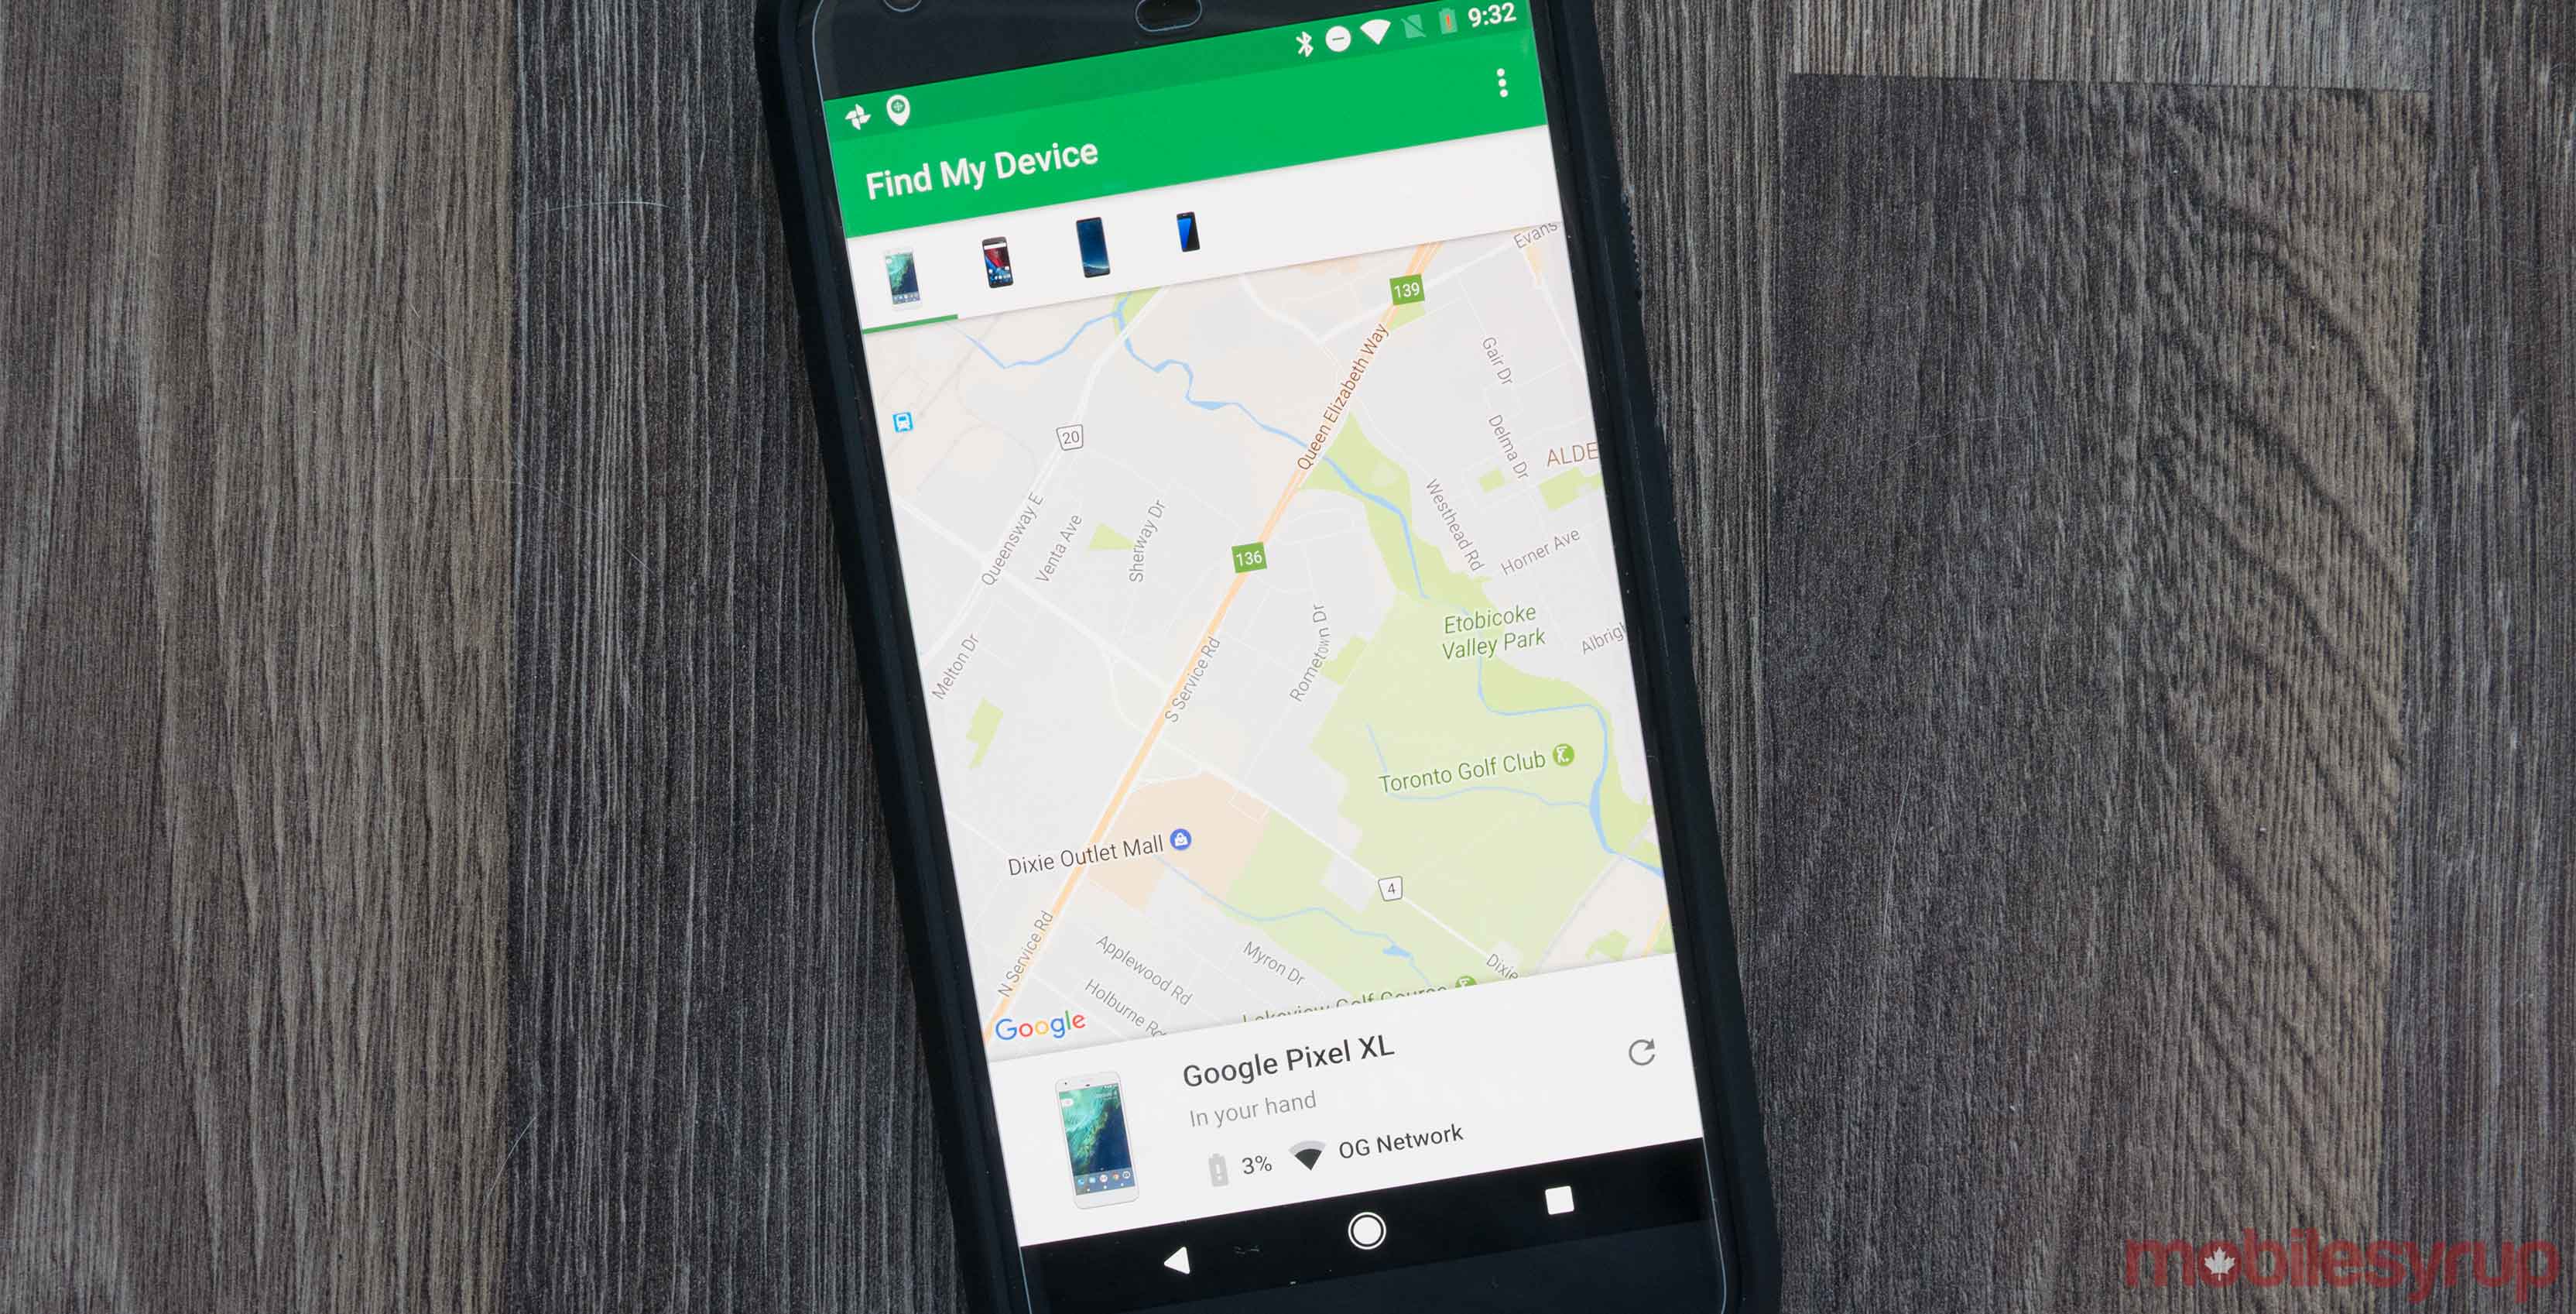 find my phone android app free download